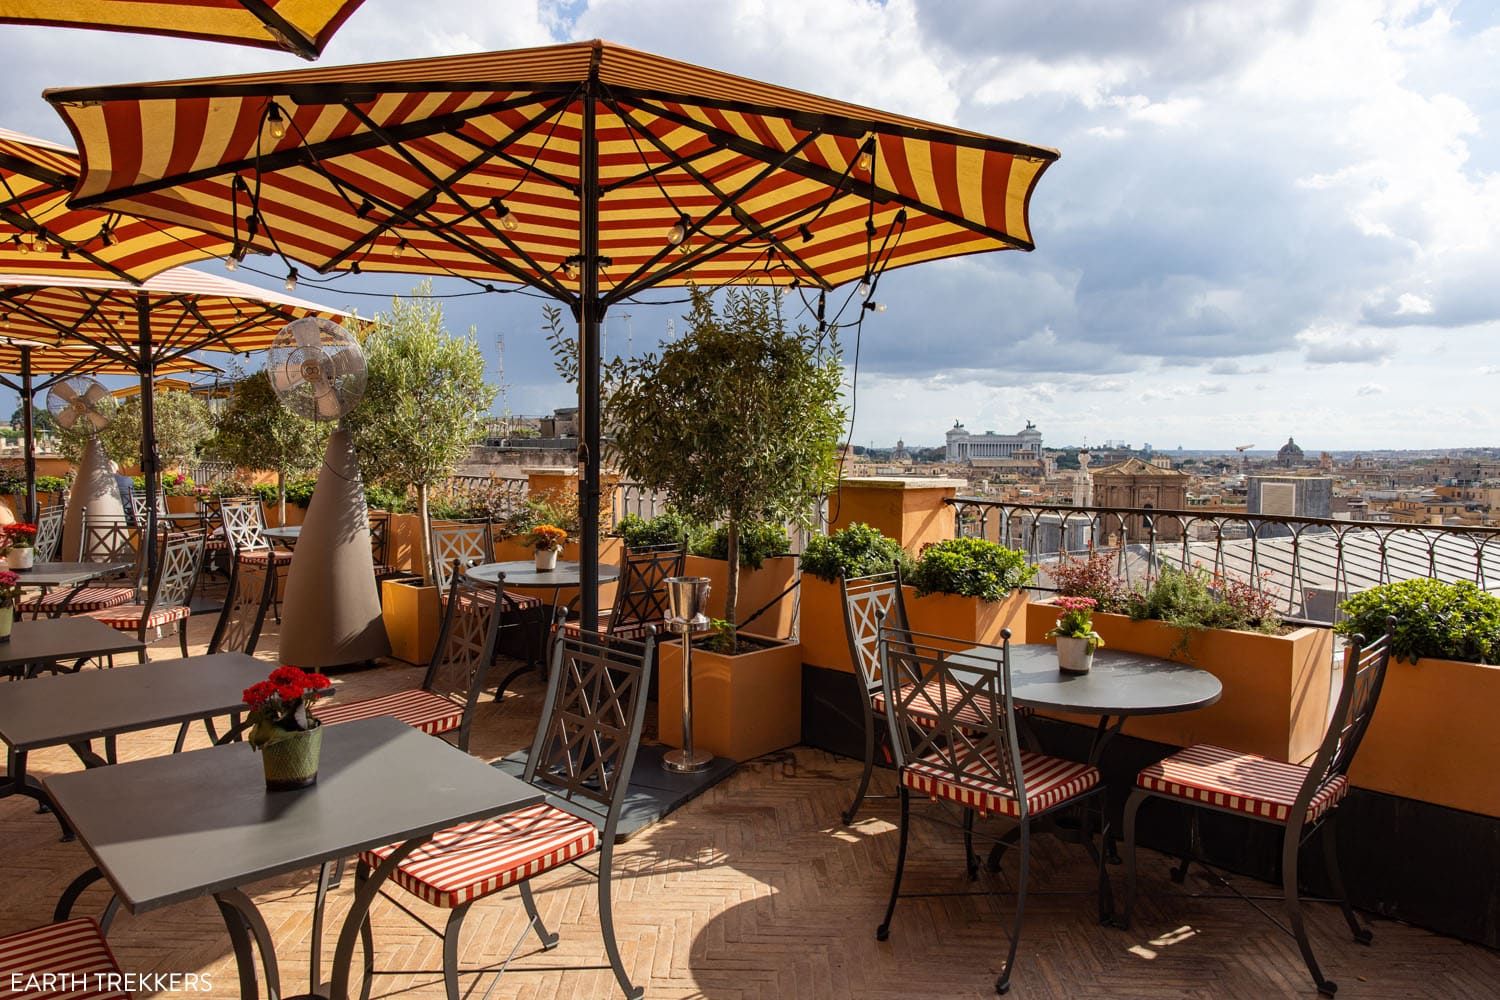 Cielo Terrace Rome | 3 Days in Rome Itinerary